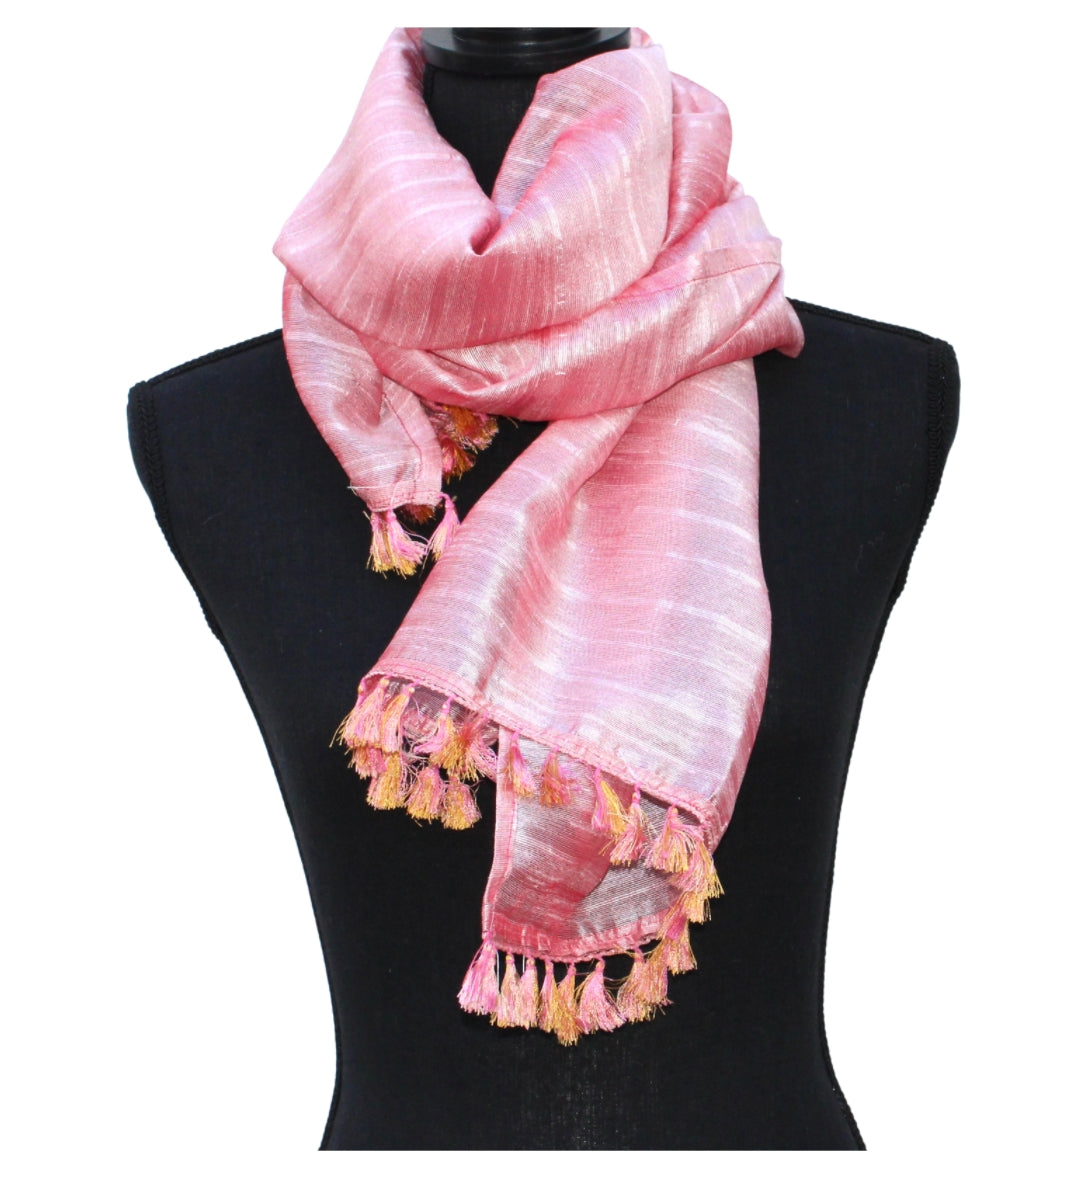 The Upcycled Silk Scarf - Textured Pink